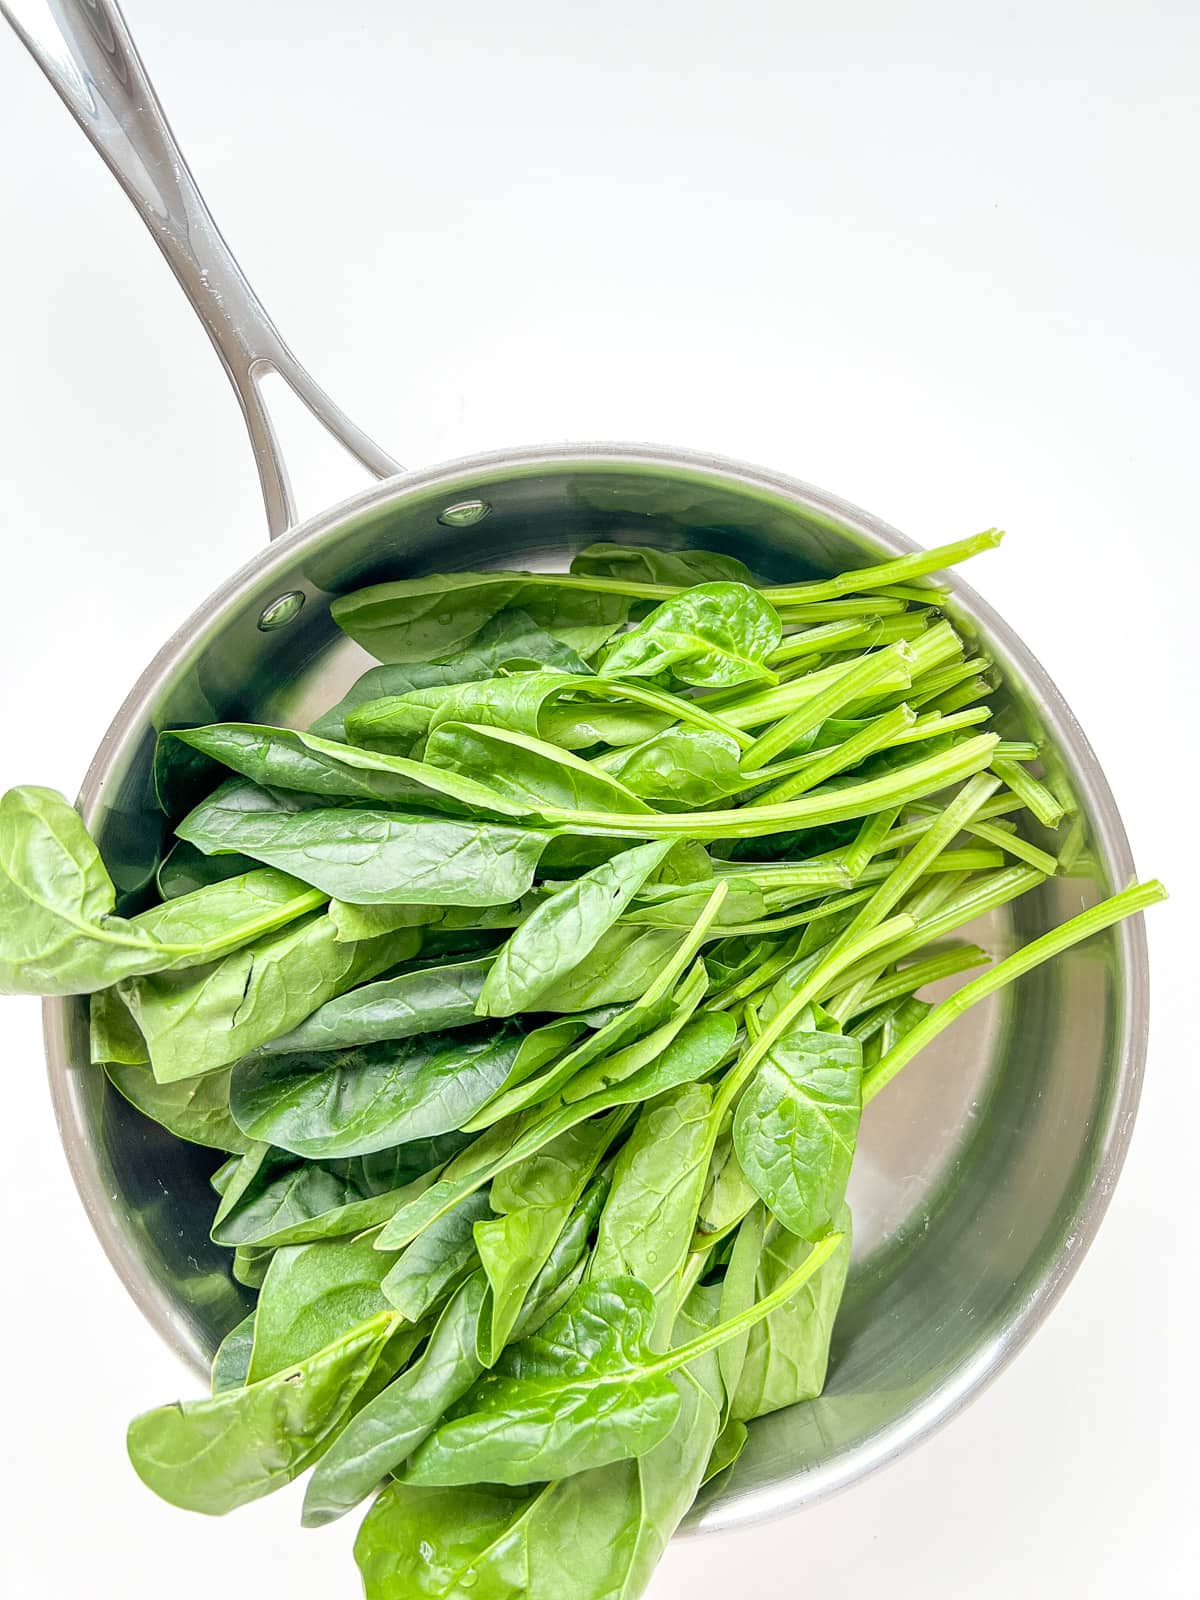 An image of spinach inside a pan before it is cooked.